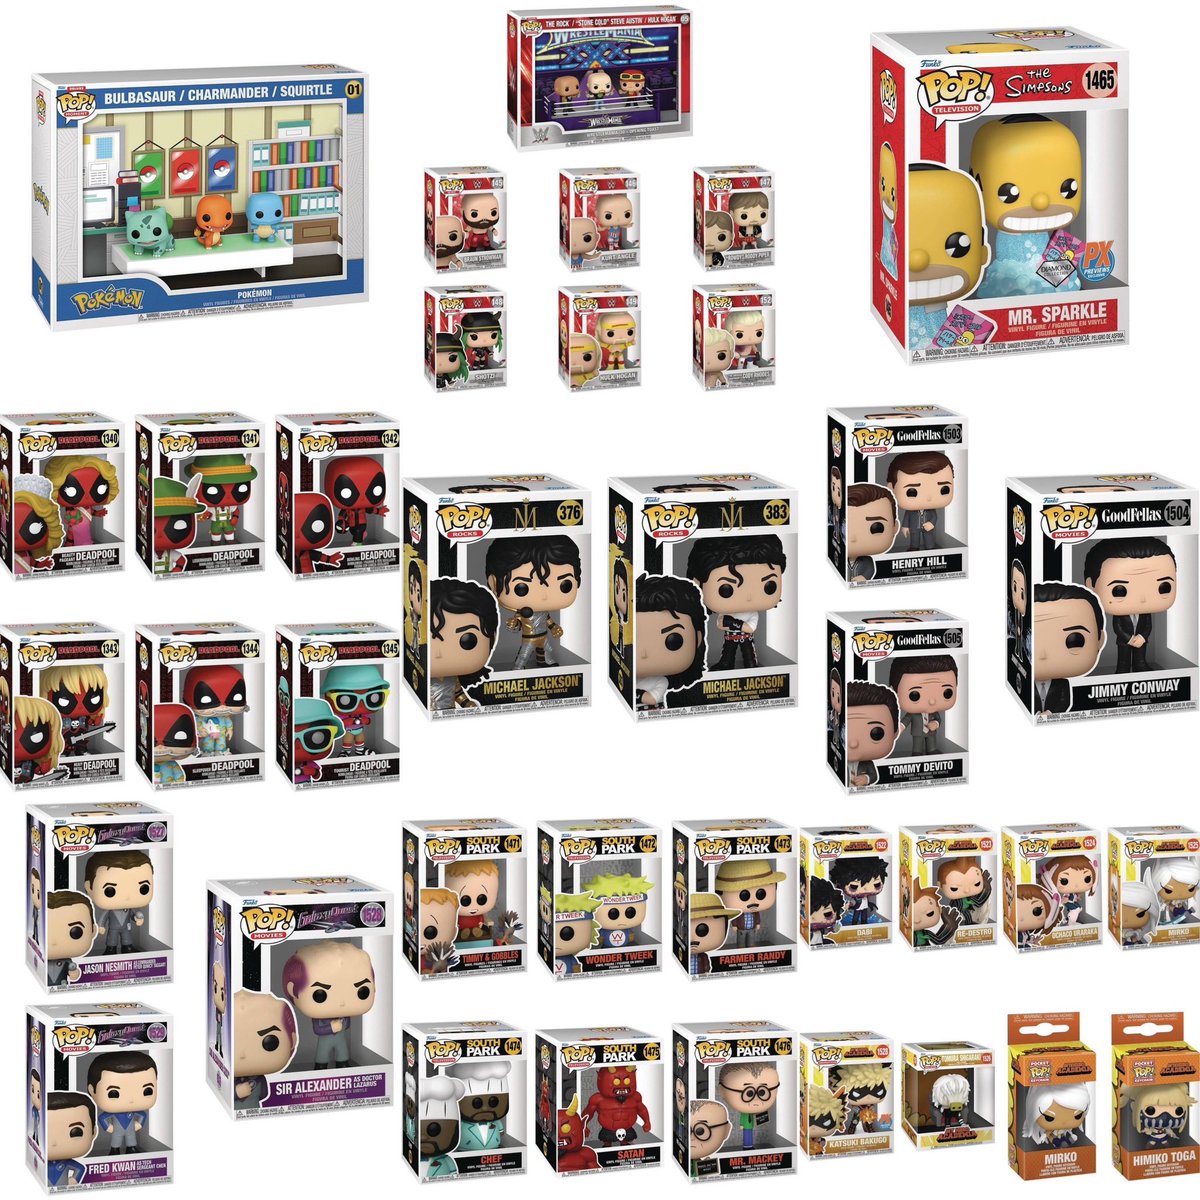 Preorders for this week’s releases start on Wednesday at 9AM PT!
#Ad #Funko #Collectibles
.
Amazon - amzn.to/47qbZfV
Entertainment Earth - distracker.info/3H7AHqG
.
#MyHeroAcademia #SouthPark #WWE #Pokemon #MichaelJackson #Deadpool #Marvel #Goodfellas #GalaxyQuest…